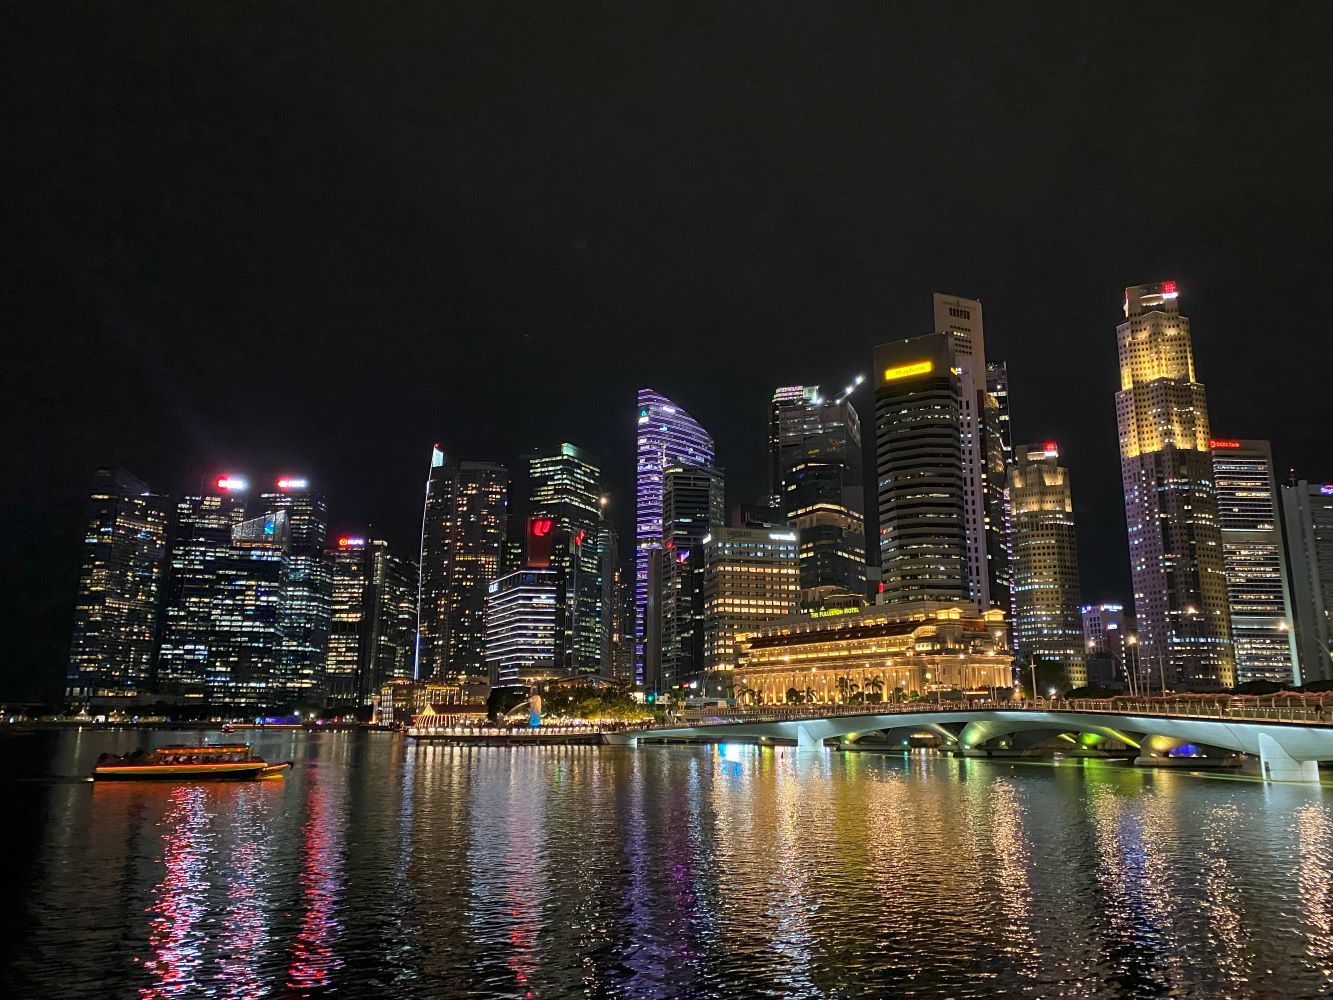 Singapore travel tips & recommendations